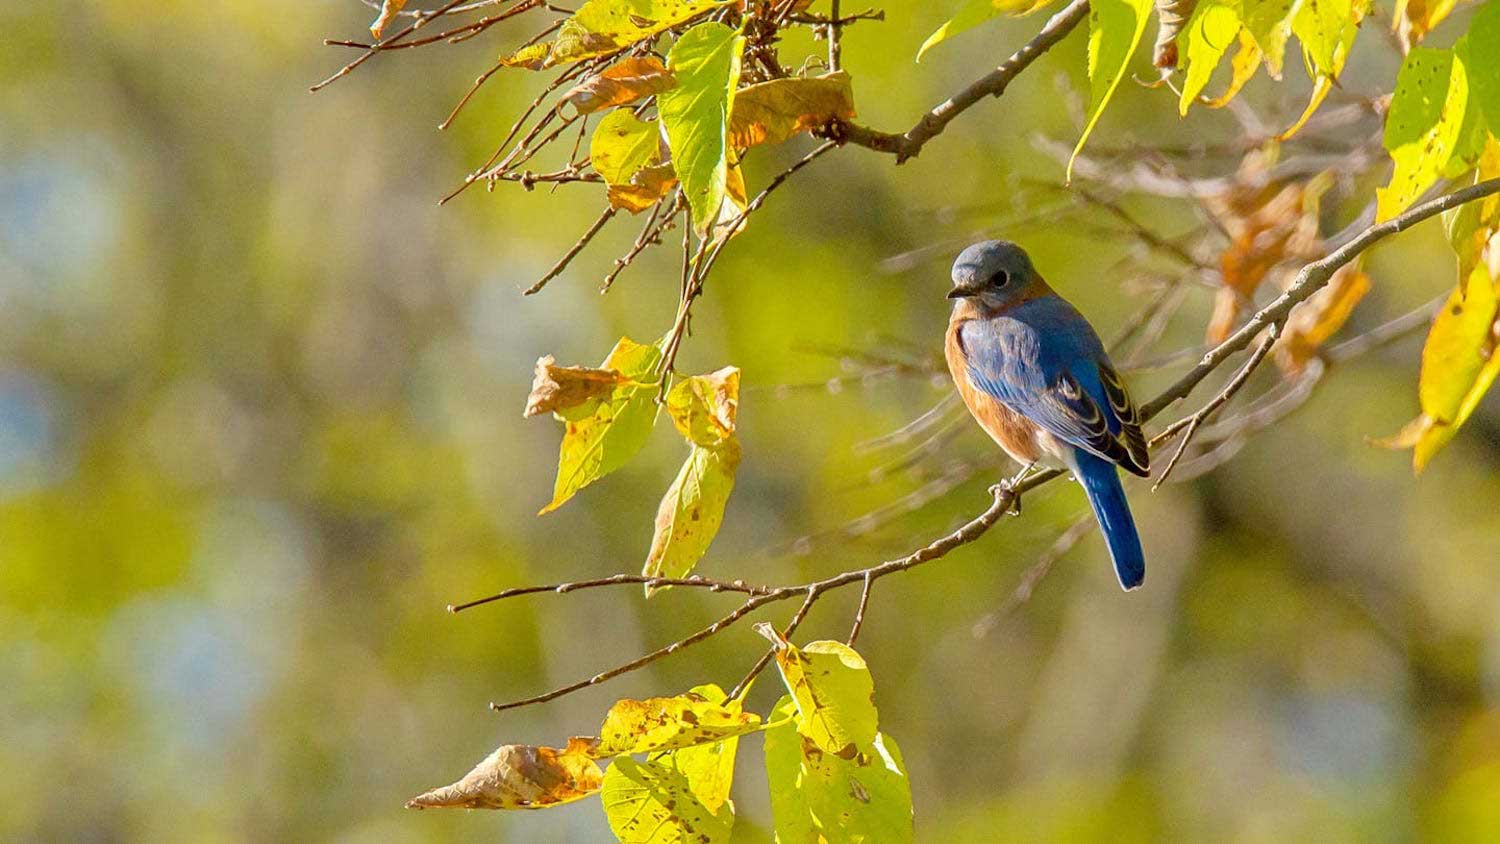 An eastern bluebird perched on a branch.